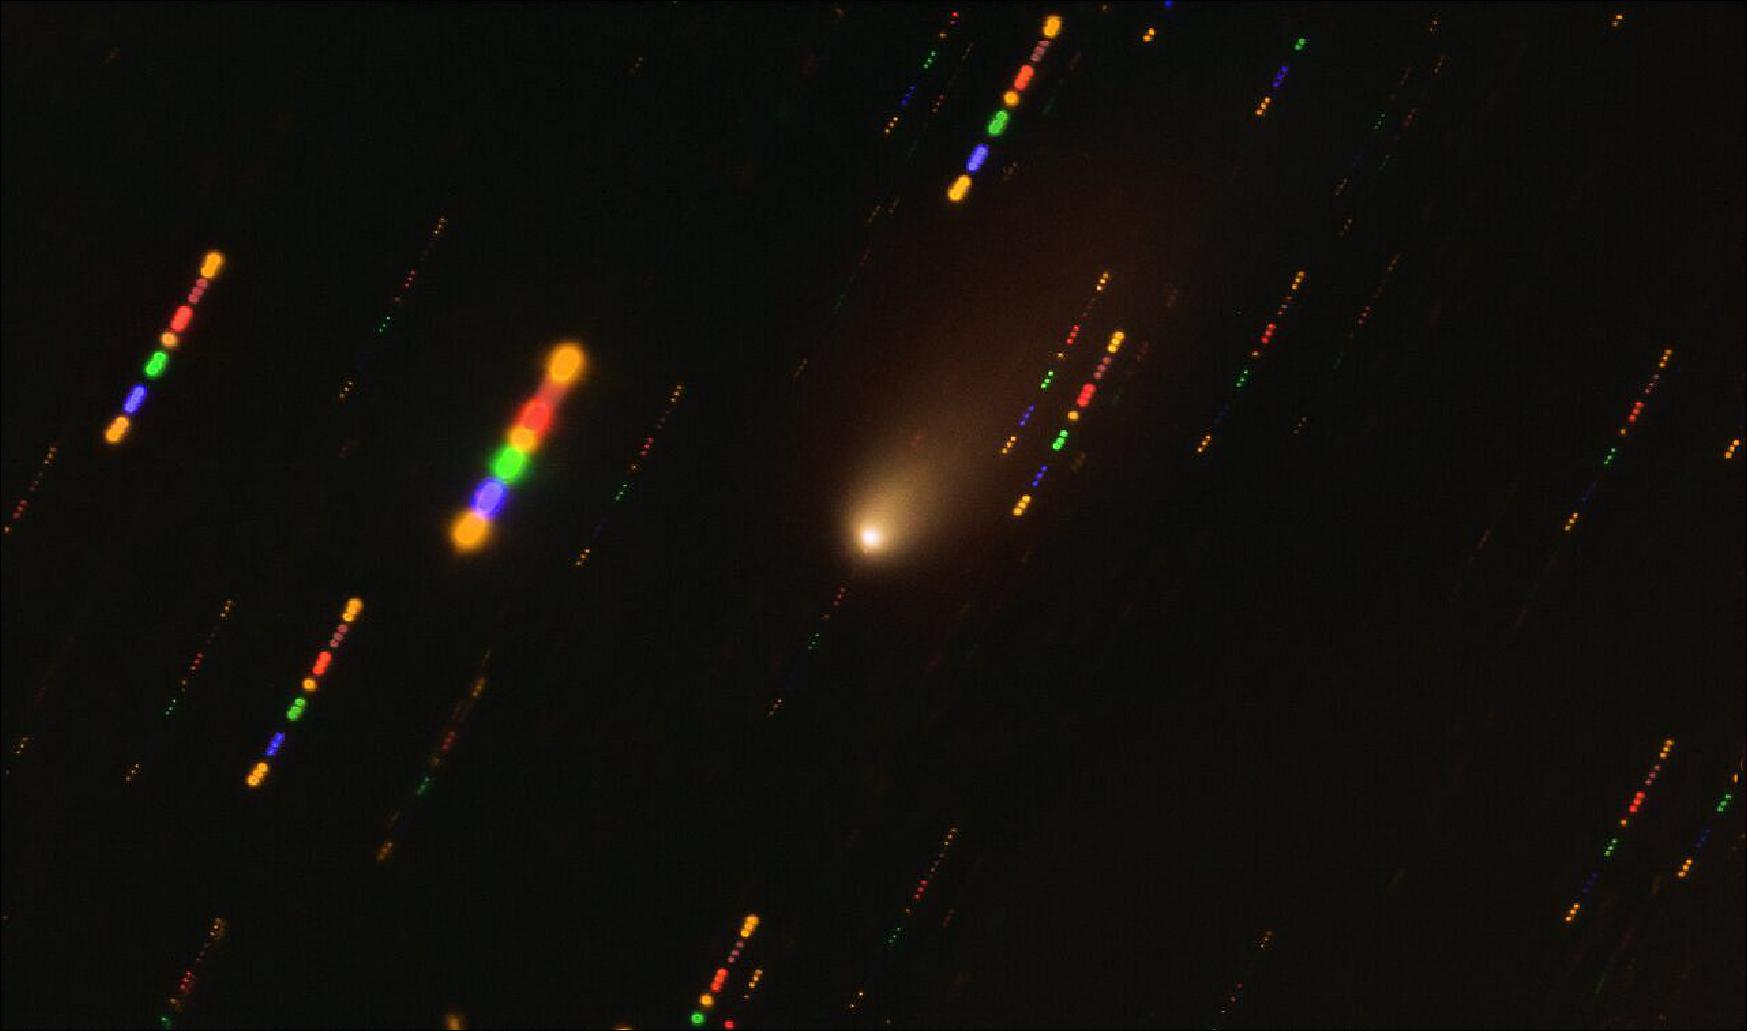 Figure 23: This image was taken with the FORS2 instrument on ESO’s VLT in late 2019, when comet 2I/Borisov passed near the Sun. Since the comet was travelling at breakneck speed, around 175,000 km/hr, the background stars appeared as streaks of light as the telescope followed the comet’s trajectory. The colors in these streaks give the image some disco flair and are the result of combining observations in different wavelength bands, highlighted by the various colors in this composite image (image credit: ESO, O. Hainaut)